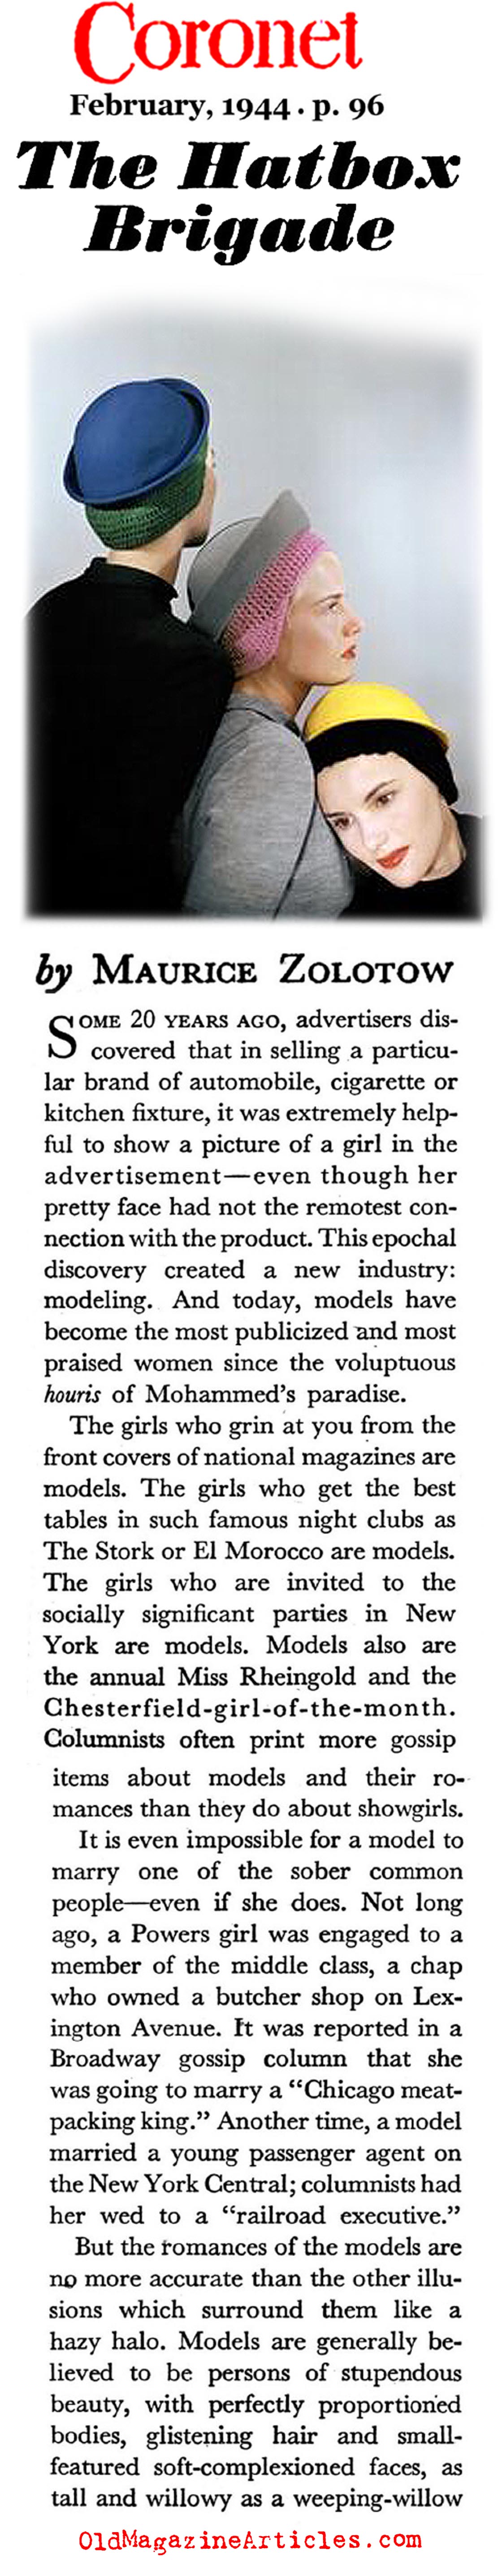 Fashion Modeling in the 1940s (Coronet Magazine, 1944)